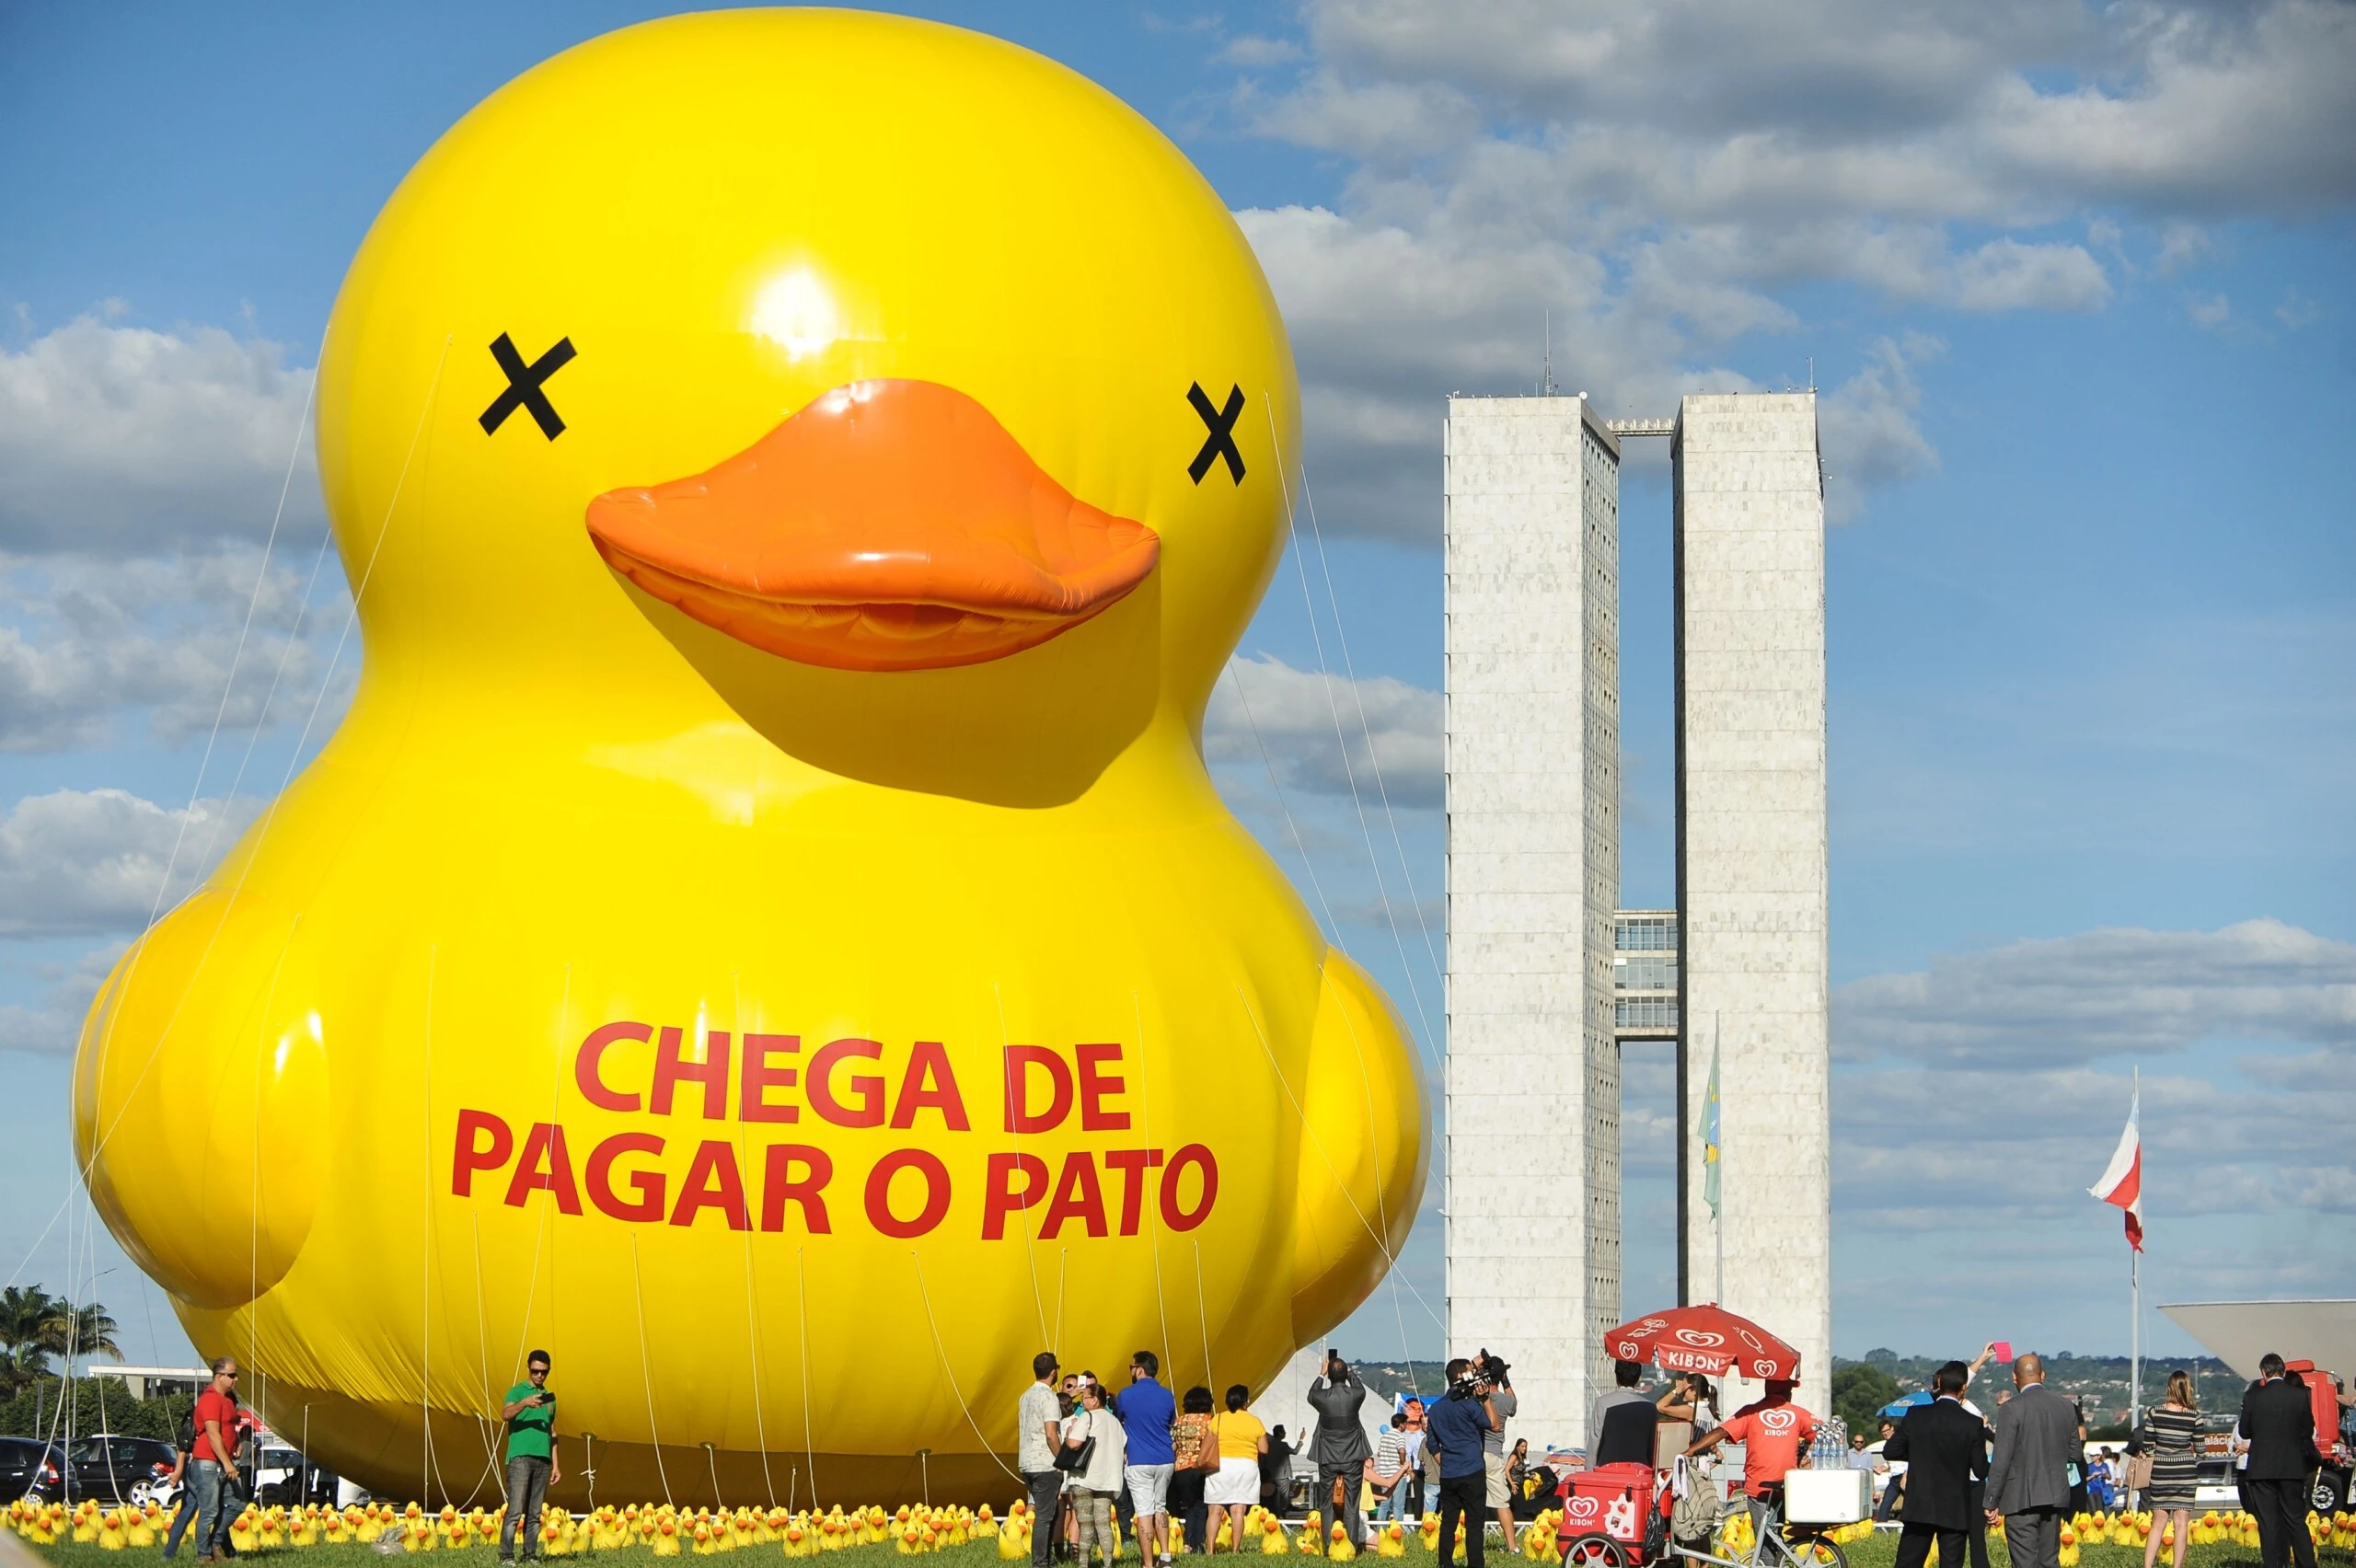 The Federation of Industries of the State of Sao Paulo (FIESP) protest with a giant duck against taxes with a giant duck with an inscription that reads "Enough of taking the blame" at the Esplanada dos Ministérios in Brasilia on March 29, 2016. AFP PHOTO/ANDRESSA ANHOLETE / AFP / Andressa Anholete        (Photo credit should read ANDRESSA ANHOLETE/AFP/Getty Images)